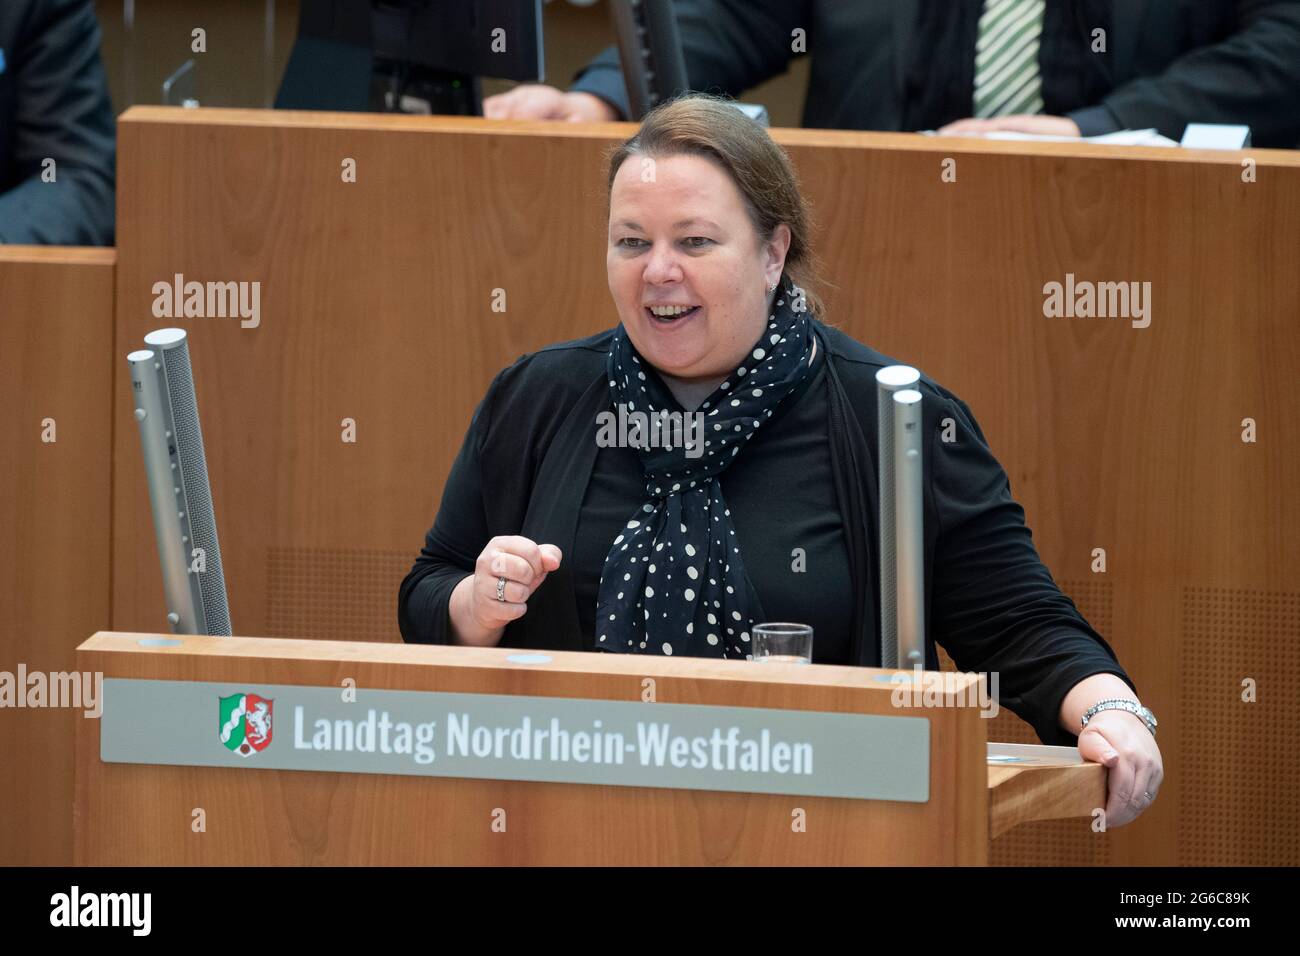 Duesseldorf, Deutschland. 01st July, 2021. Ursula HEINEN-ESSER, Minister for the Environment, Agriculture, Nature and Consumer Protection the State of North Rhine-Westphalia, during speech, debate on the subject of